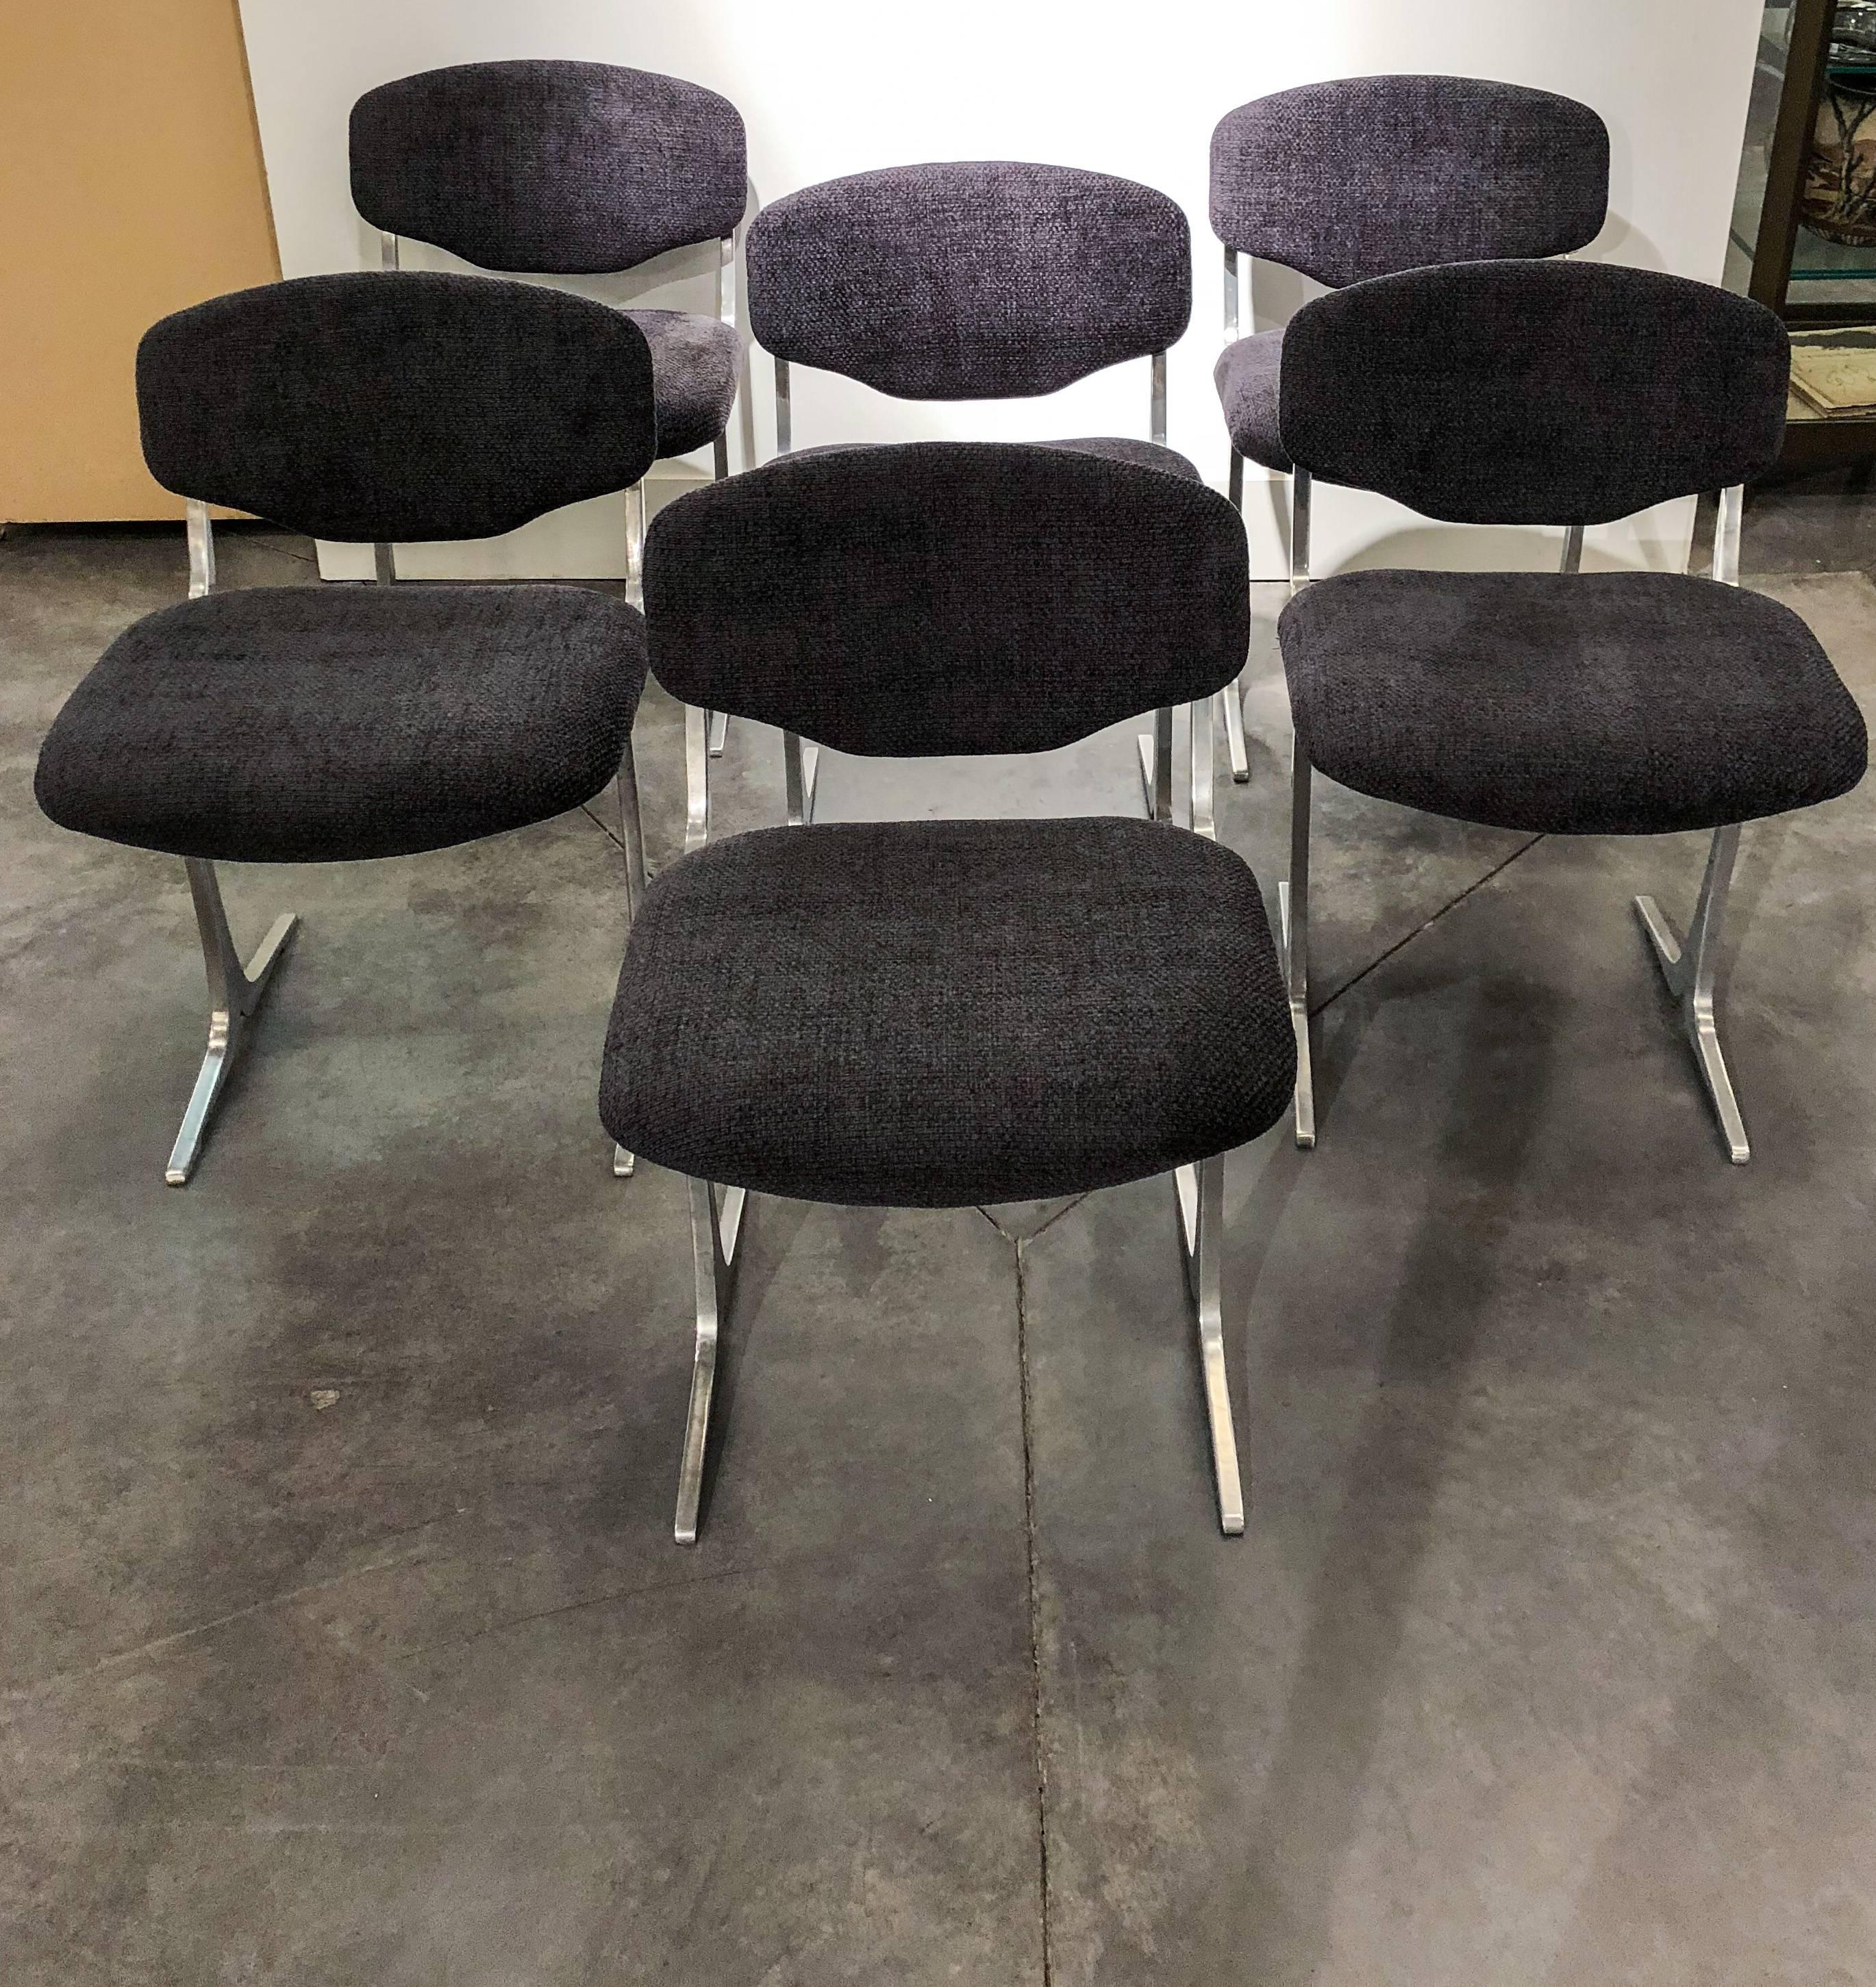 Mid-Century Modern Suite of Six Modernist Stainless Steel and Fabric Chairs, France, 1970s